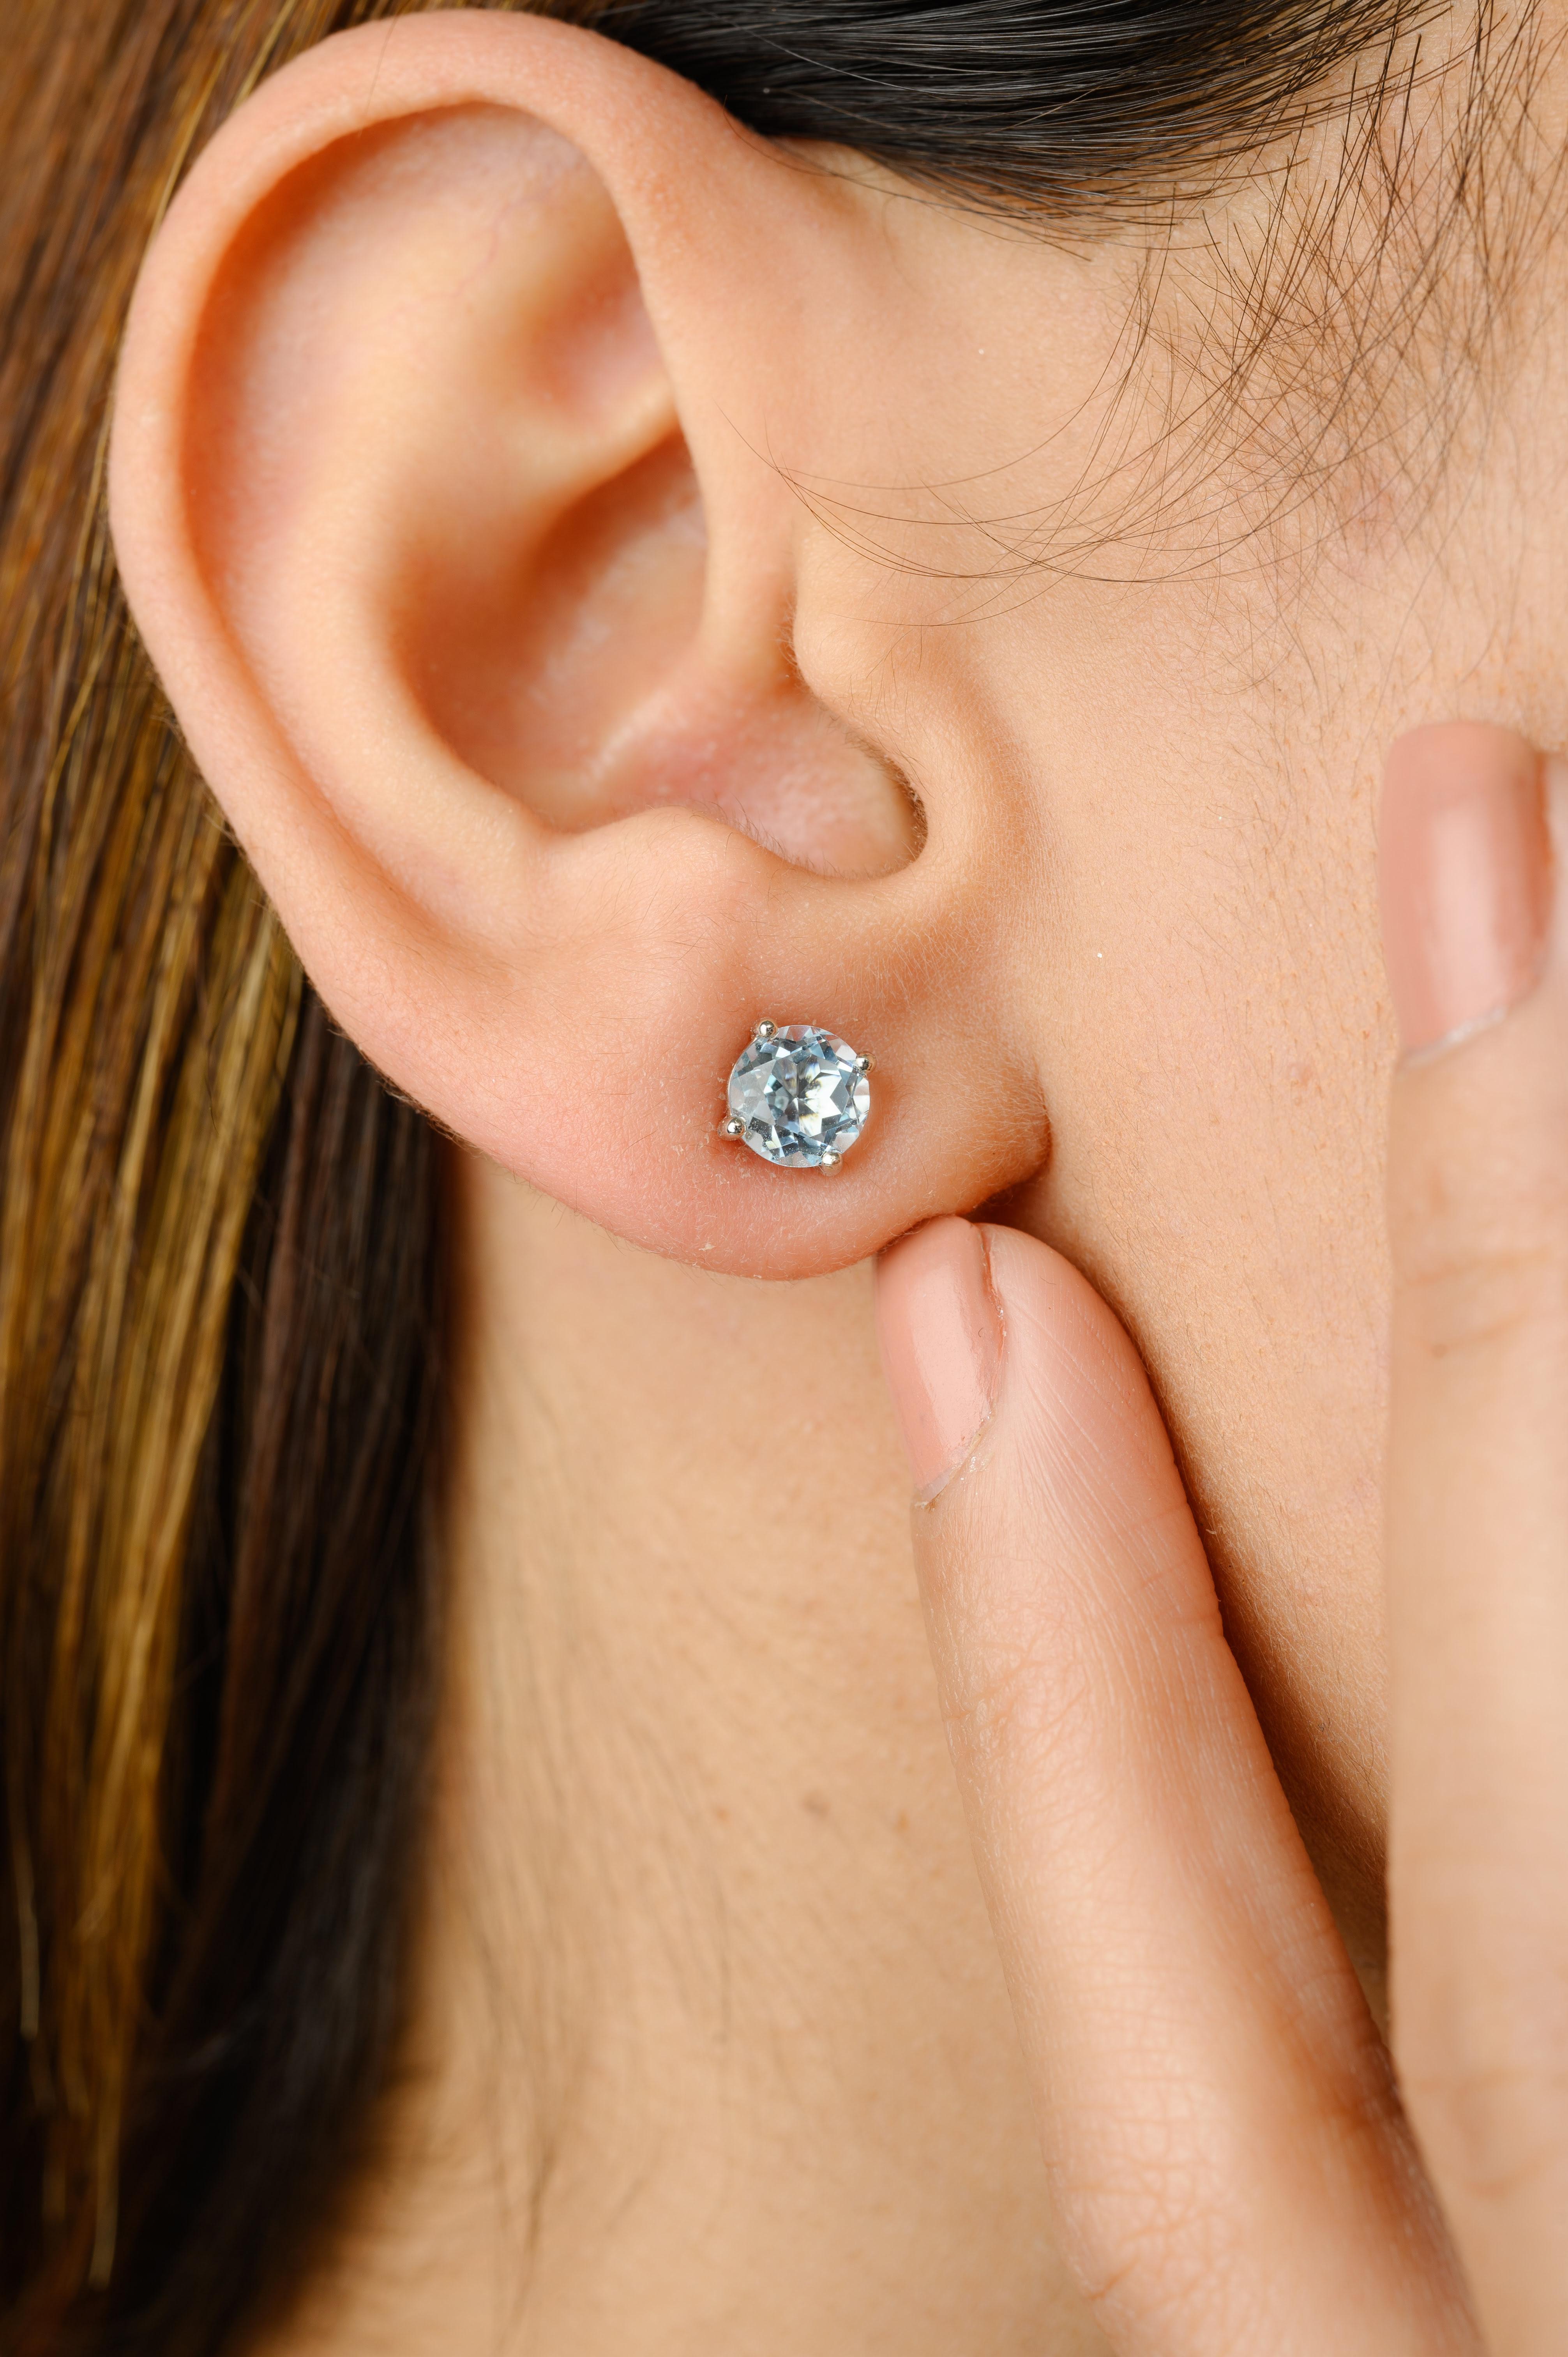 Enchanting Dainty Round Blue Topaz Stud Earrings in 14K Gold to make a statement with your look. You shall need stud earrings to make a statement with your look. These earrings create a sparkling, luxurious look featuring round cut blue topaz.
Blue